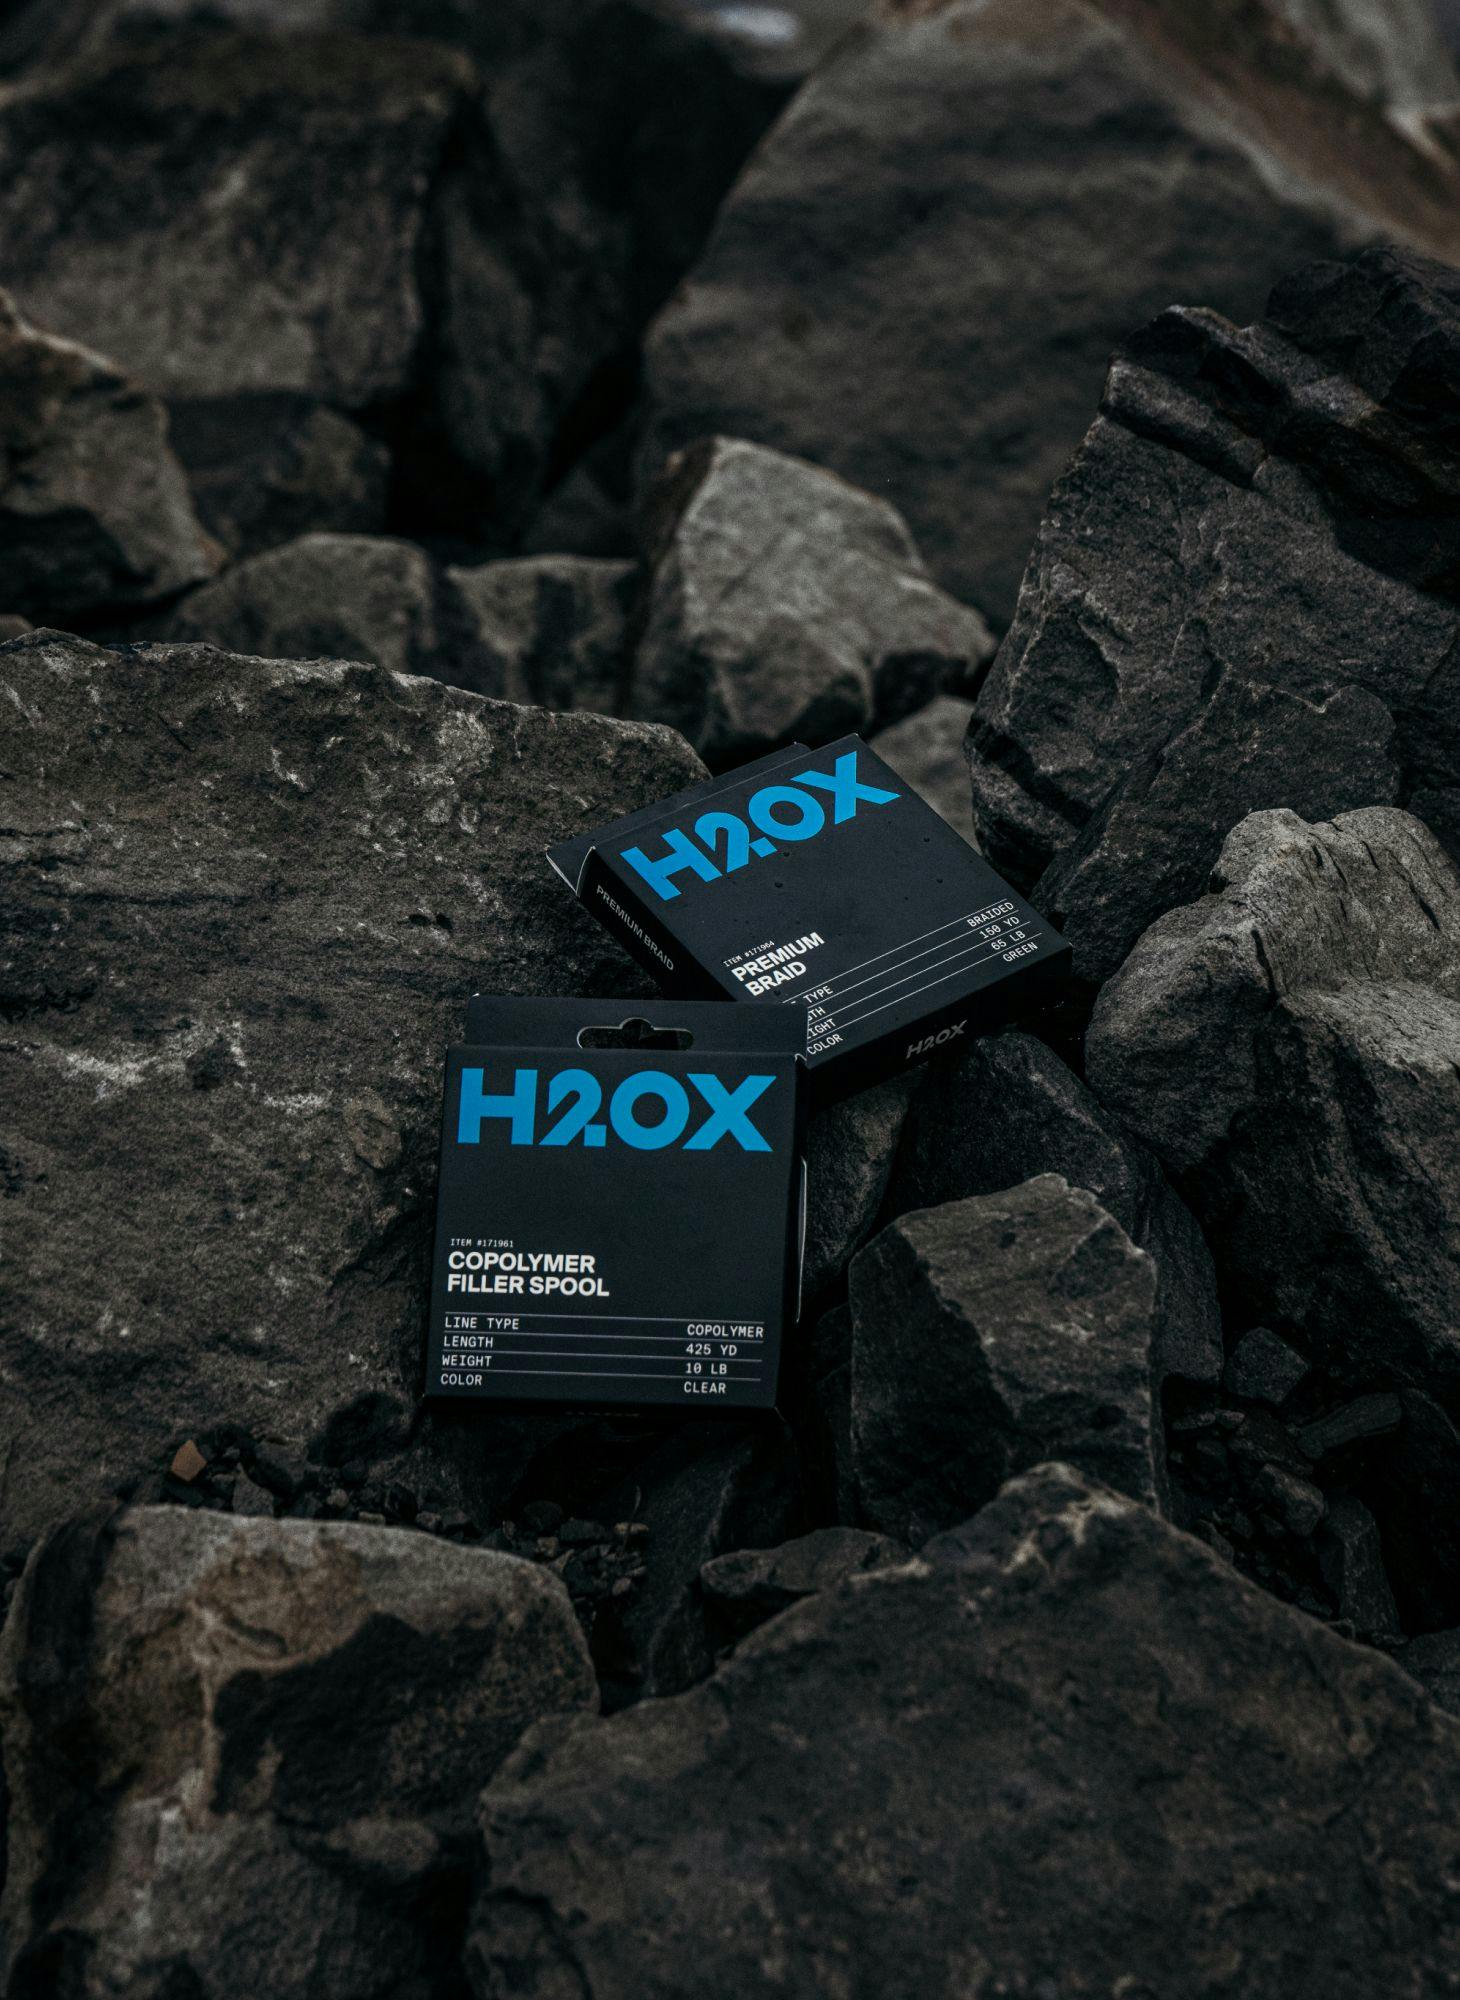 Two H20X product boxes sitting on large rocks